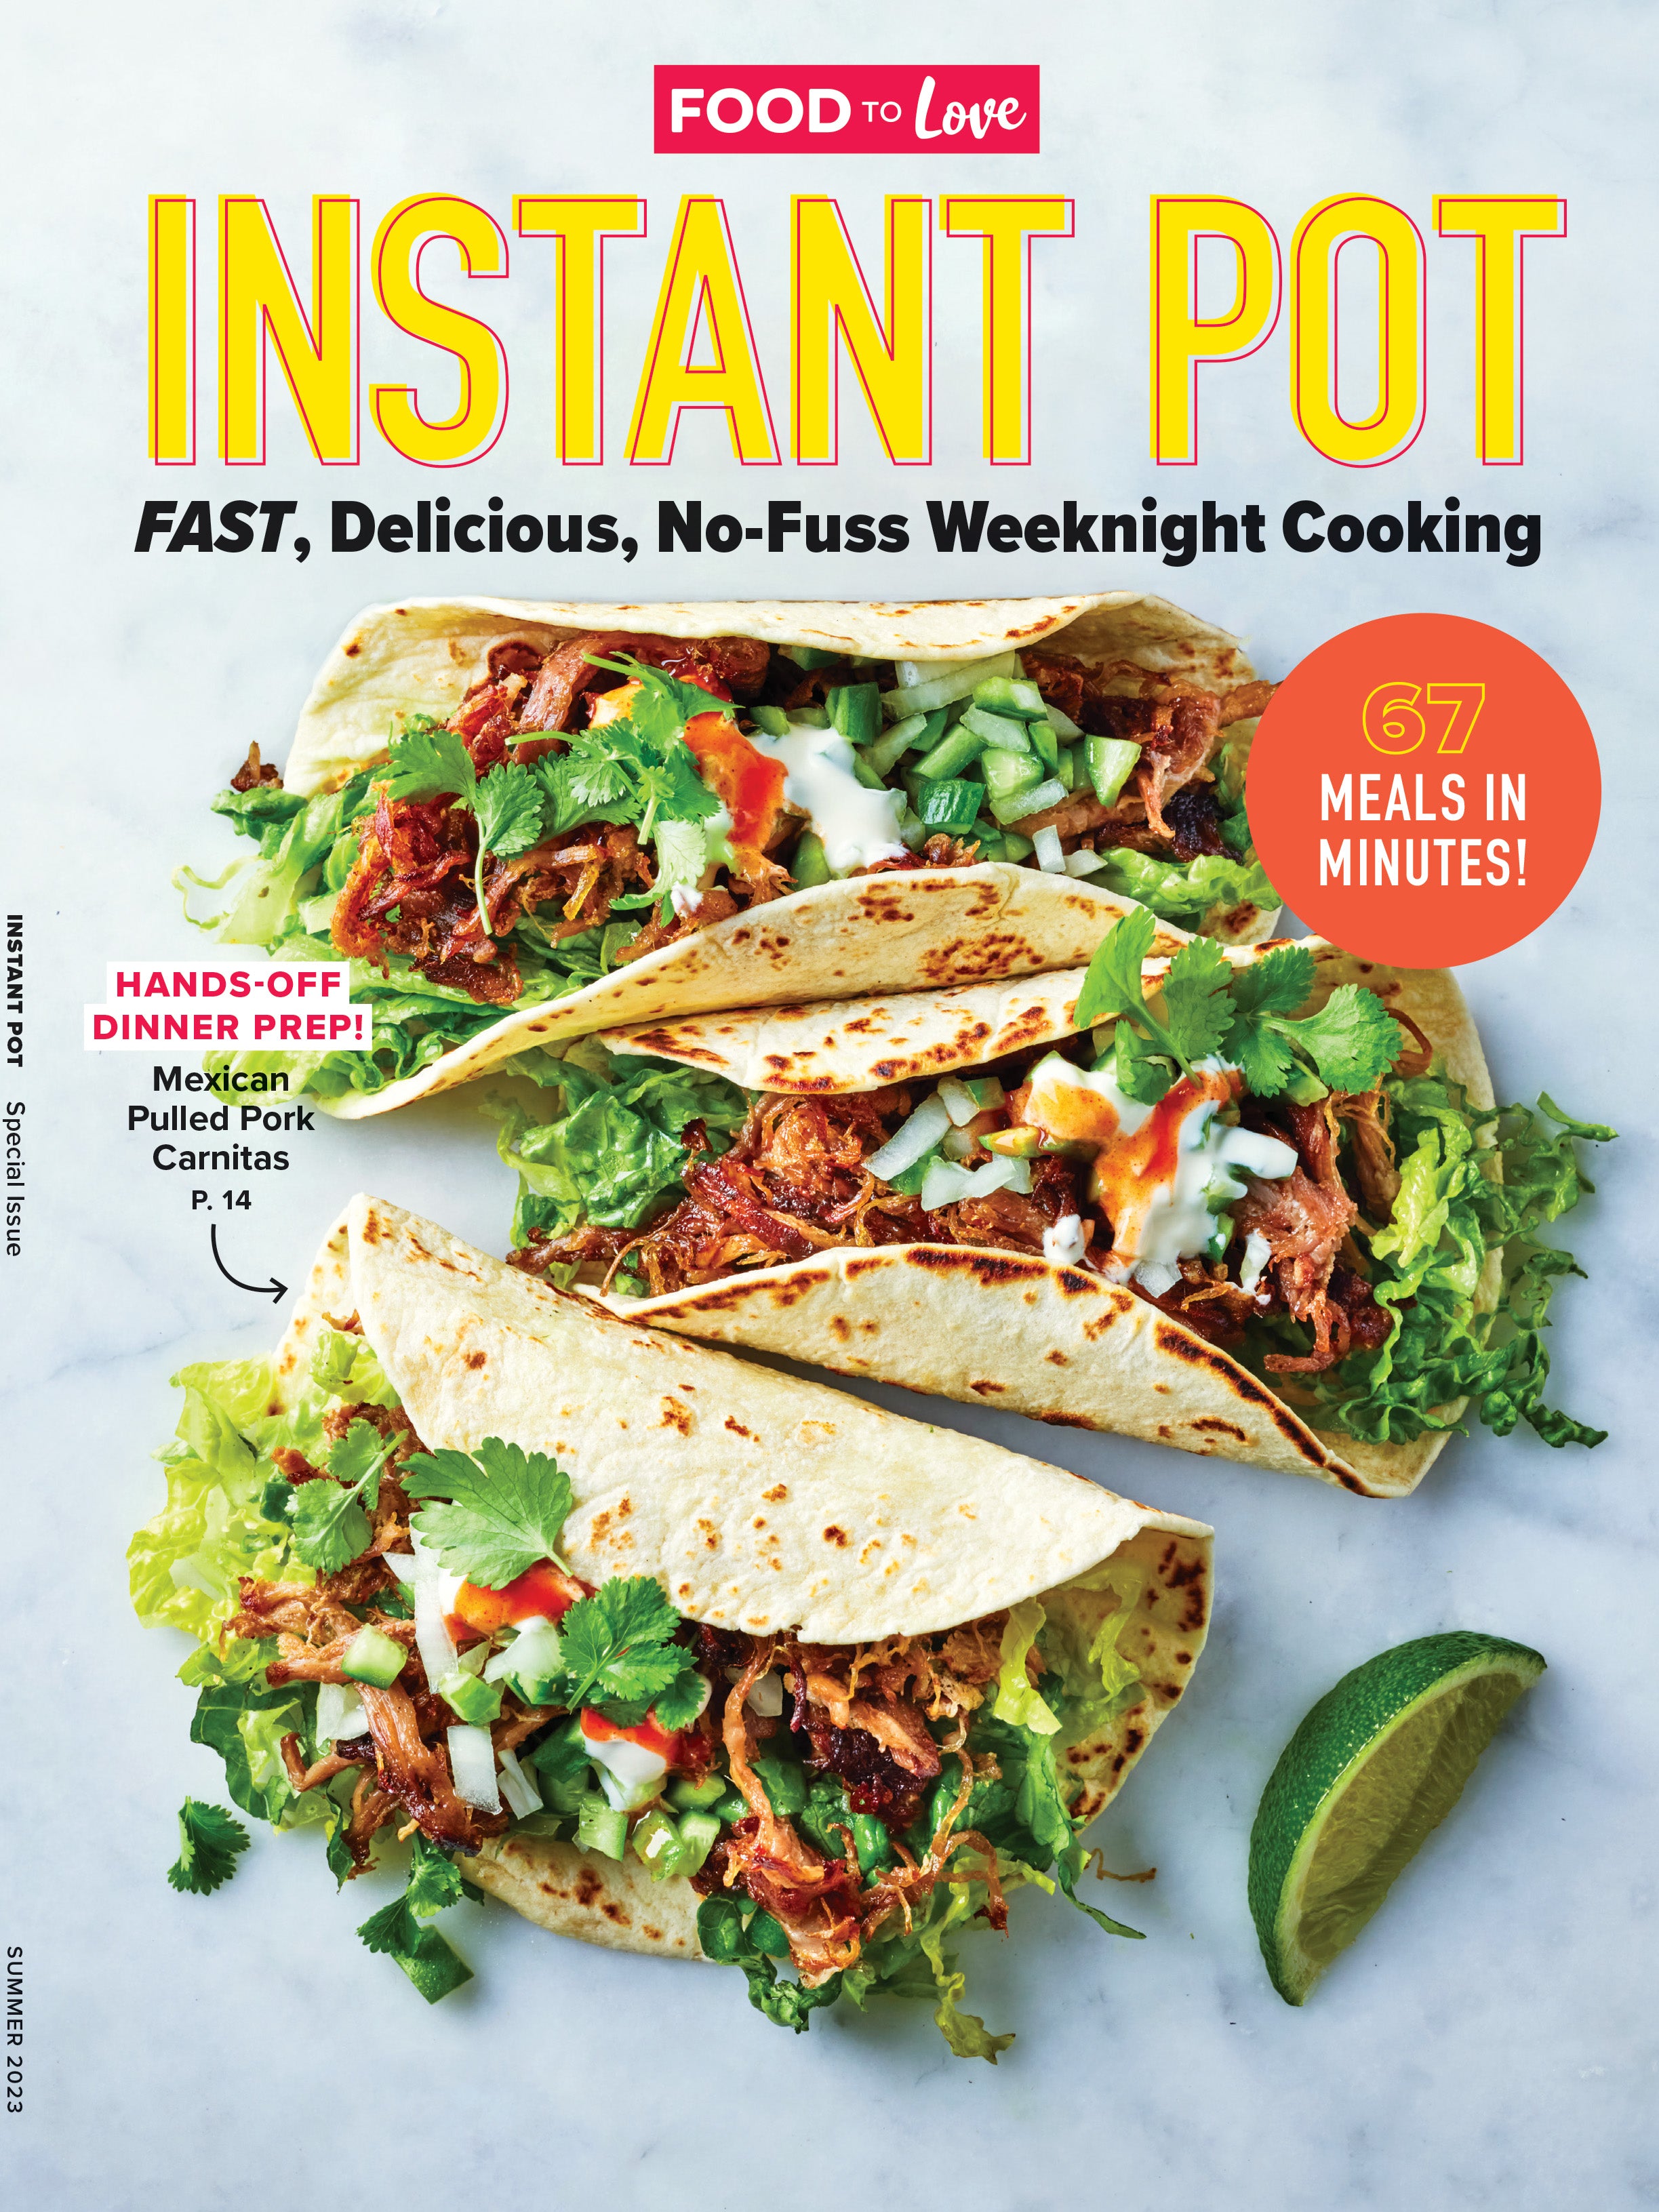 Shop　Minutes,　In　Love　Food　Meals　Hands　Pot:　Instant　to　Dinner　Magazine　Prep　67　–　Off　US